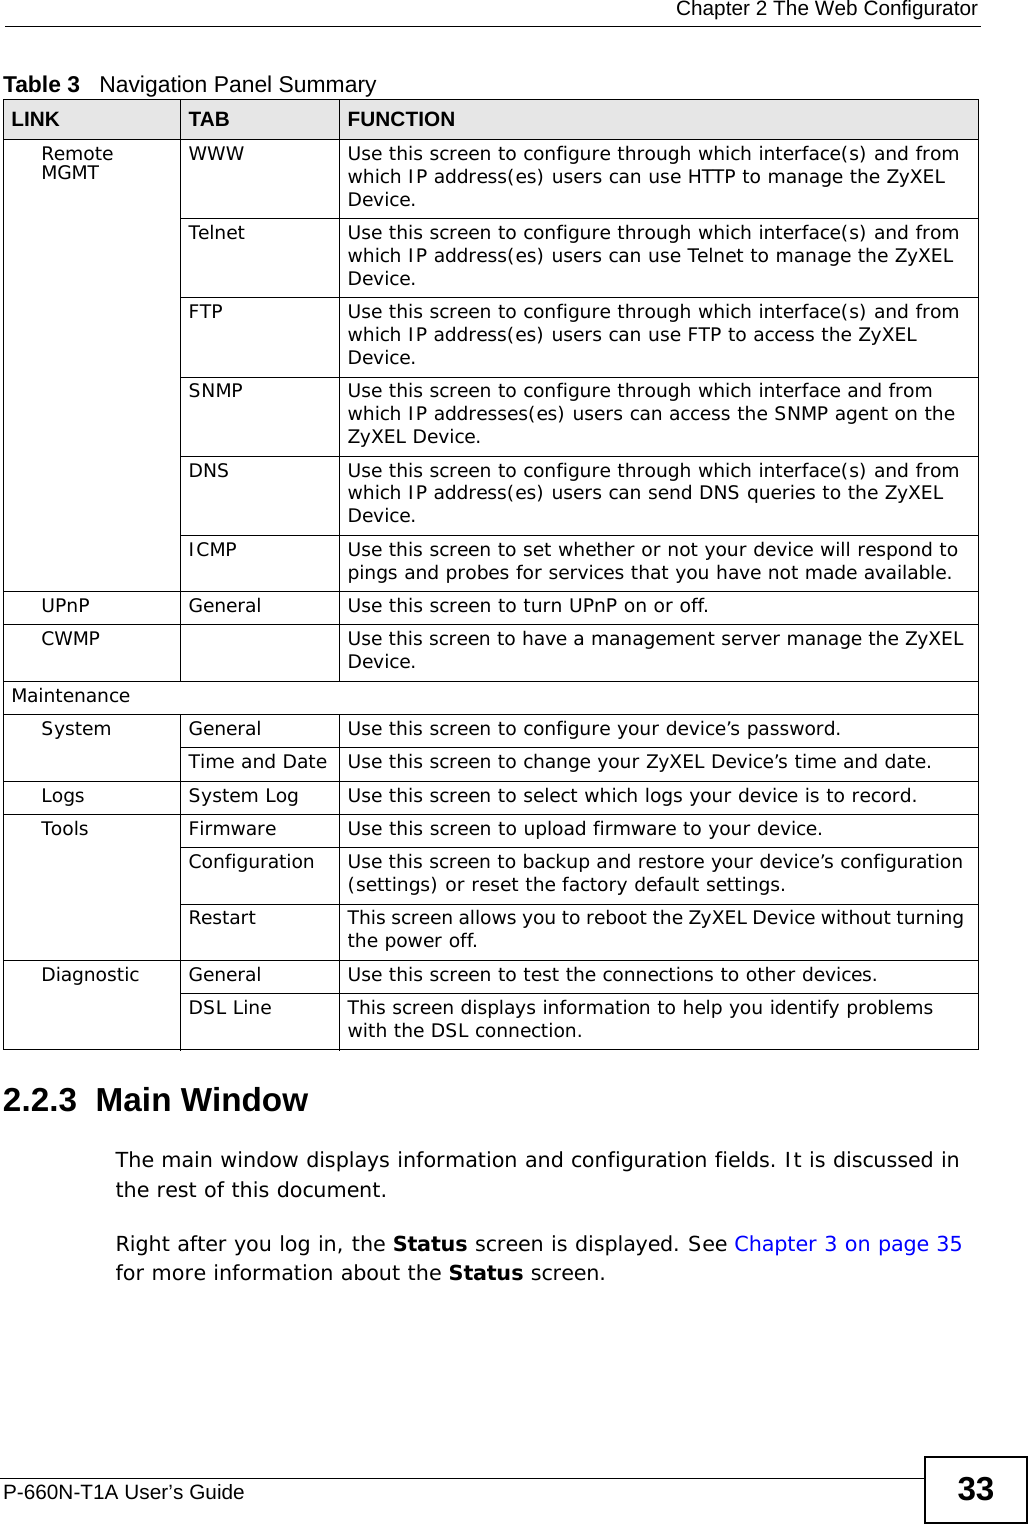  Chapter 2 The Web ConfiguratorP-660N-T1A User’s Guide 332.2.3  Main WindowThe main window displays information and configuration fields. It is discussed in the rest of this document.Right after you log in, the Status screen is displayed. See Chapter 3 on page 35 for more information about the Status screen.Remote MGMT WWW Use this screen to configure through which interface(s) and from which IP address(es) users can use HTTP to manage the ZyXEL Device.Telnet Use this screen to configure through which interface(s) and from which IP address(es) users can use Telnet to manage the ZyXEL Device.FTP Use this screen to configure through which interface(s) and from which IP address(es) users can use FTP to access the ZyXEL Device.SNMP Use this screen to configure through which interface and from which IP addresses(es) users can access the SNMP agent on the ZyXEL Device.DNS Use this screen to configure through which interface(s) and from which IP address(es) users can send DNS queries to the ZyXEL Device.ICMP Use this screen to set whether or not your device will respond to pings and probes for services that you have not made available.UPnP General Use this screen to turn UPnP on or off.CWMP Use this screen to have a management server manage the ZyXEL Device.MaintenanceSystem General Use this screen to configure your device’s password. Time and Date Use this screen to change your ZyXEL Device’s time and date.Logs System Log Use this screen to select which logs your device is to record.Tools Firmware Use this screen to upload firmware to your device.Configuration Use this screen to backup and restore your device’s configuration (settings) or reset the factory default settings.Restart This screen allows you to reboot the ZyXEL Device without turning the power off.Diagnostic General Use this screen to test the connections to other devices.DSL Line This screen displays information to help you identify problems with the DSL connection.Table 3   Navigation Panel SummaryLINK TAB FUNCTION